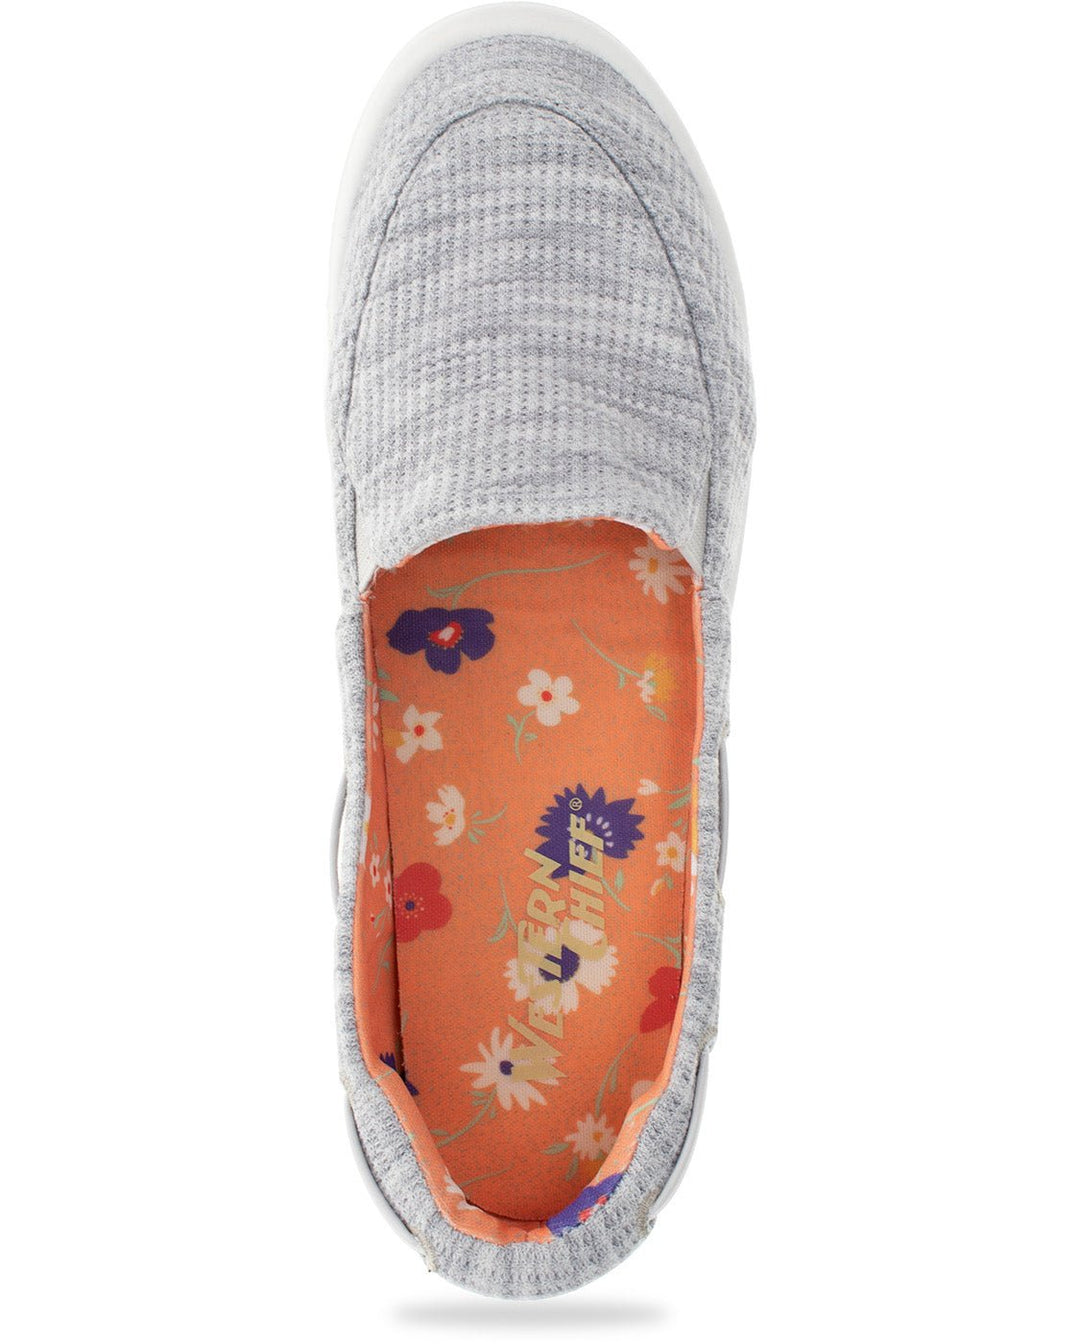 Women's Active Boat Slip On - Gray - Western Chief